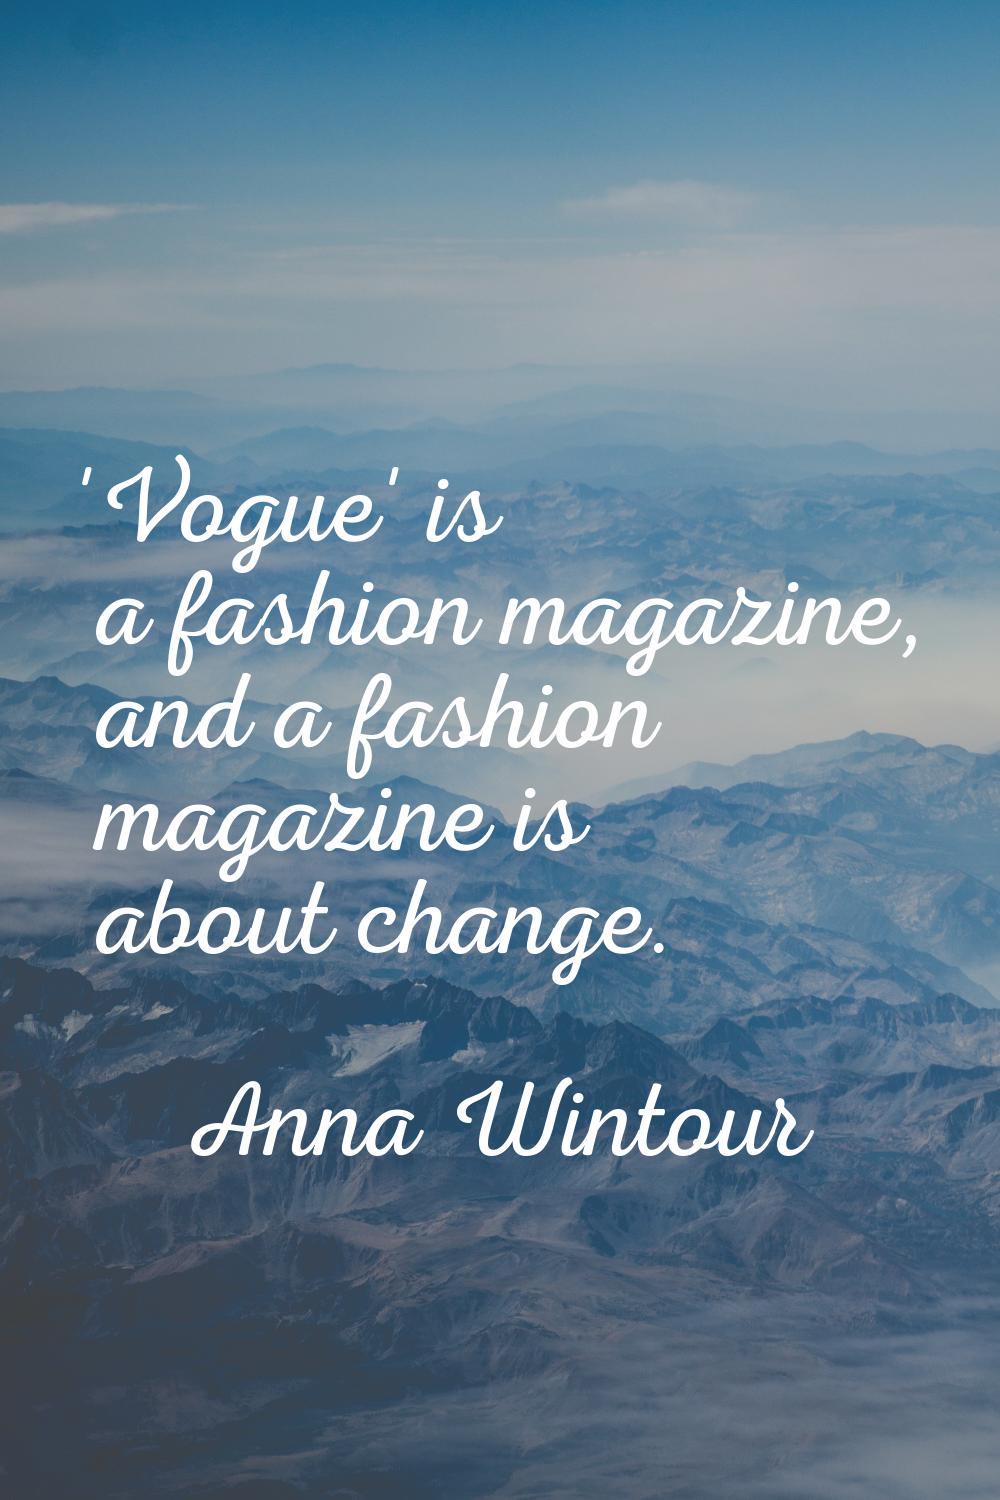 'Vogue' is a fashion magazine, and a fashion magazine is about change.